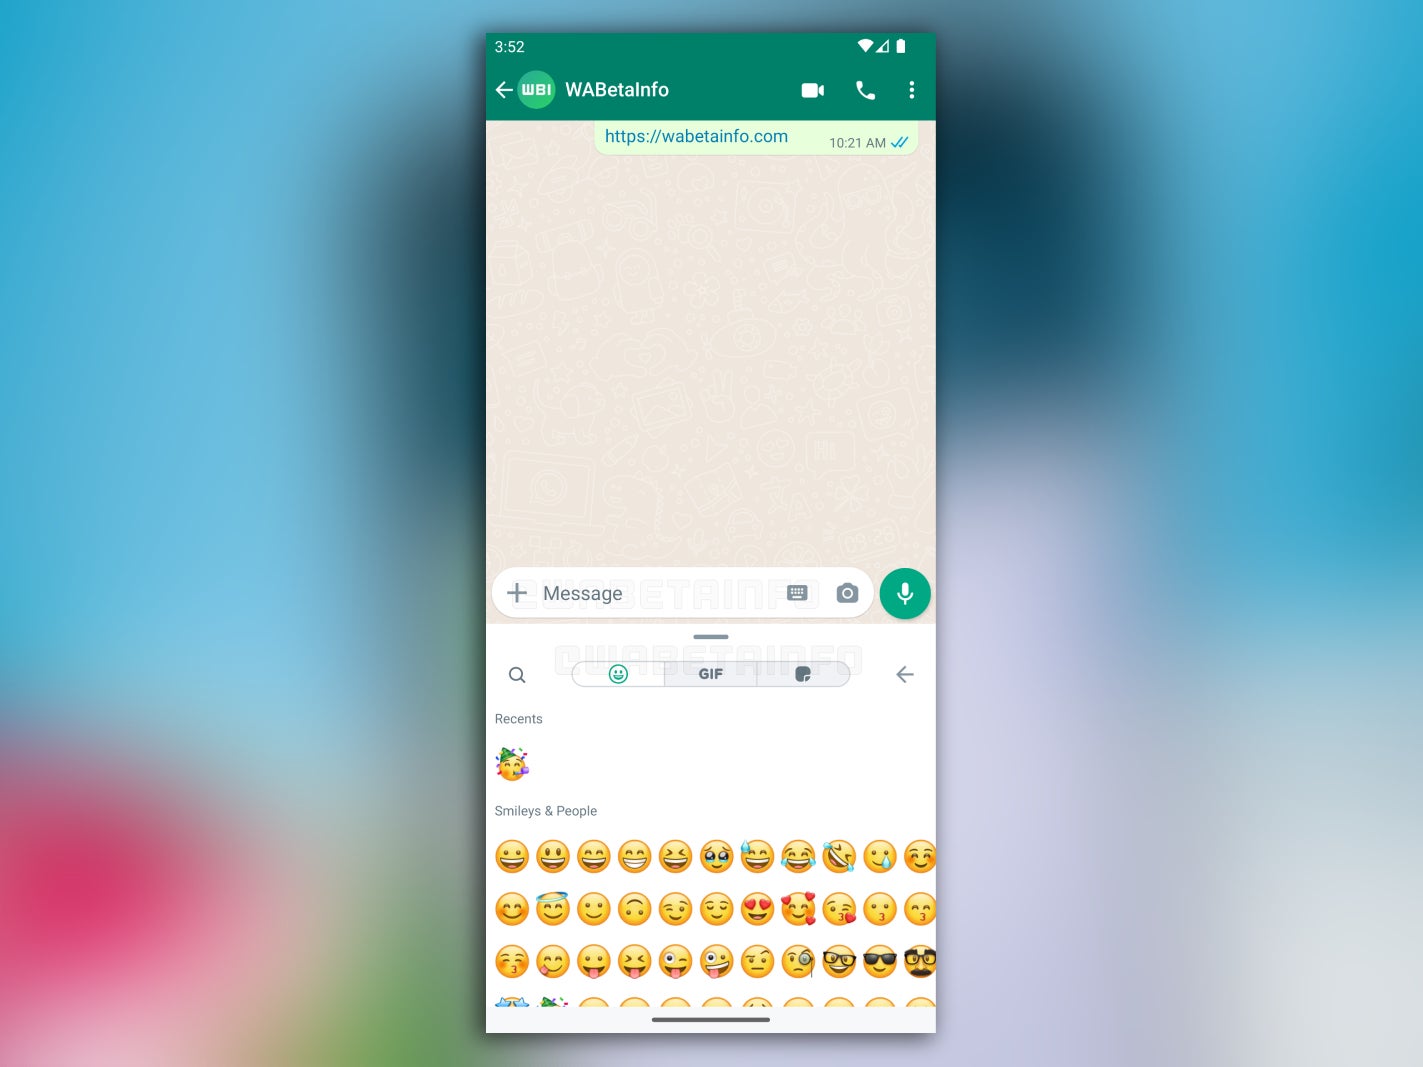 The revamp, as shown off by WABetaInfo. - WhatsApp plans to move UI elements around to provide clarity in its keyboard